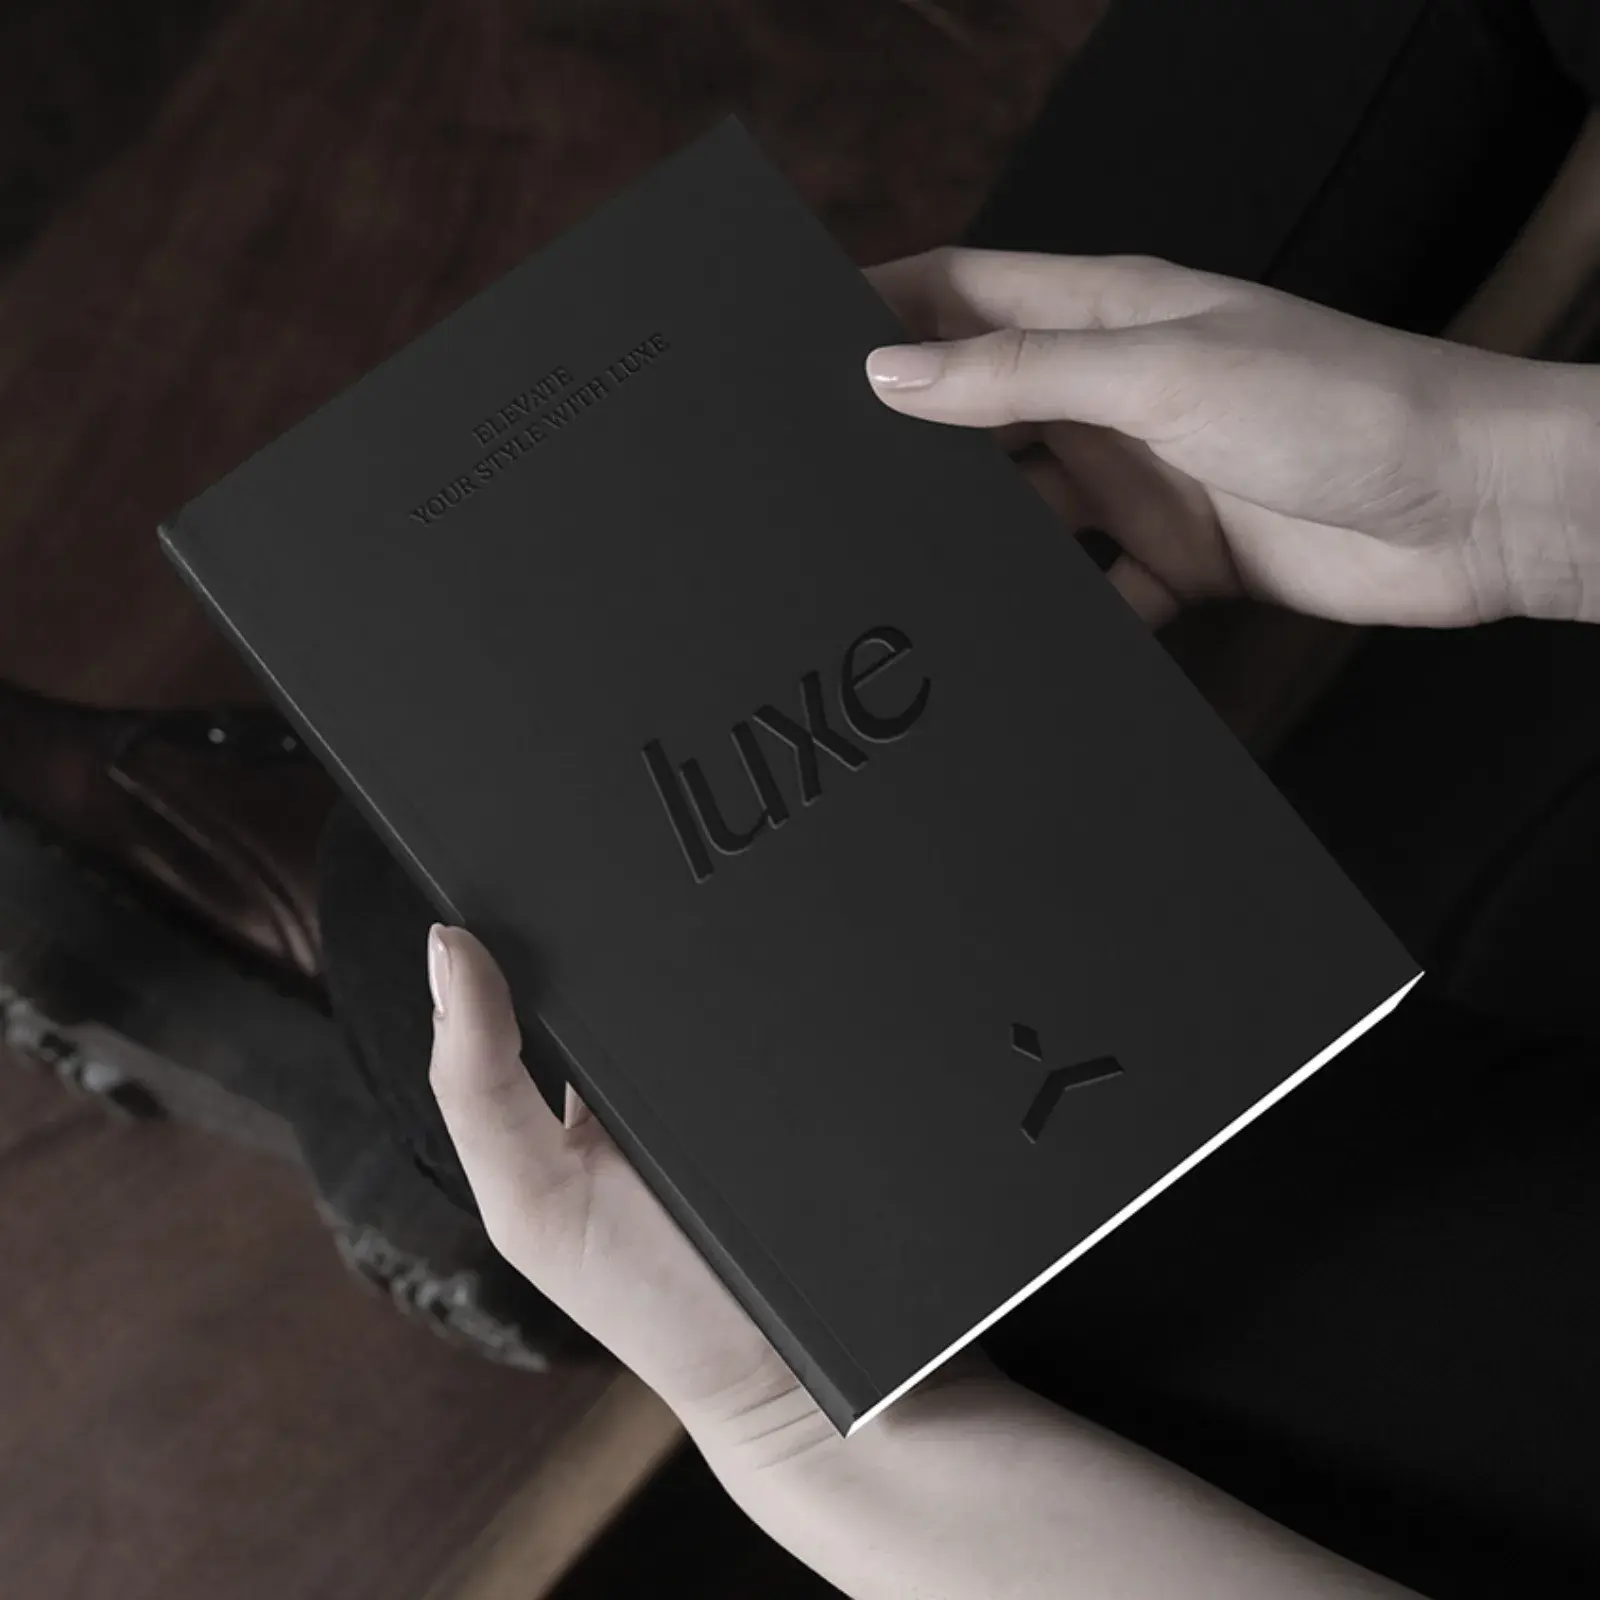 Luxe®: Branding and Visual Identity with Exquisite Silver Jewelry